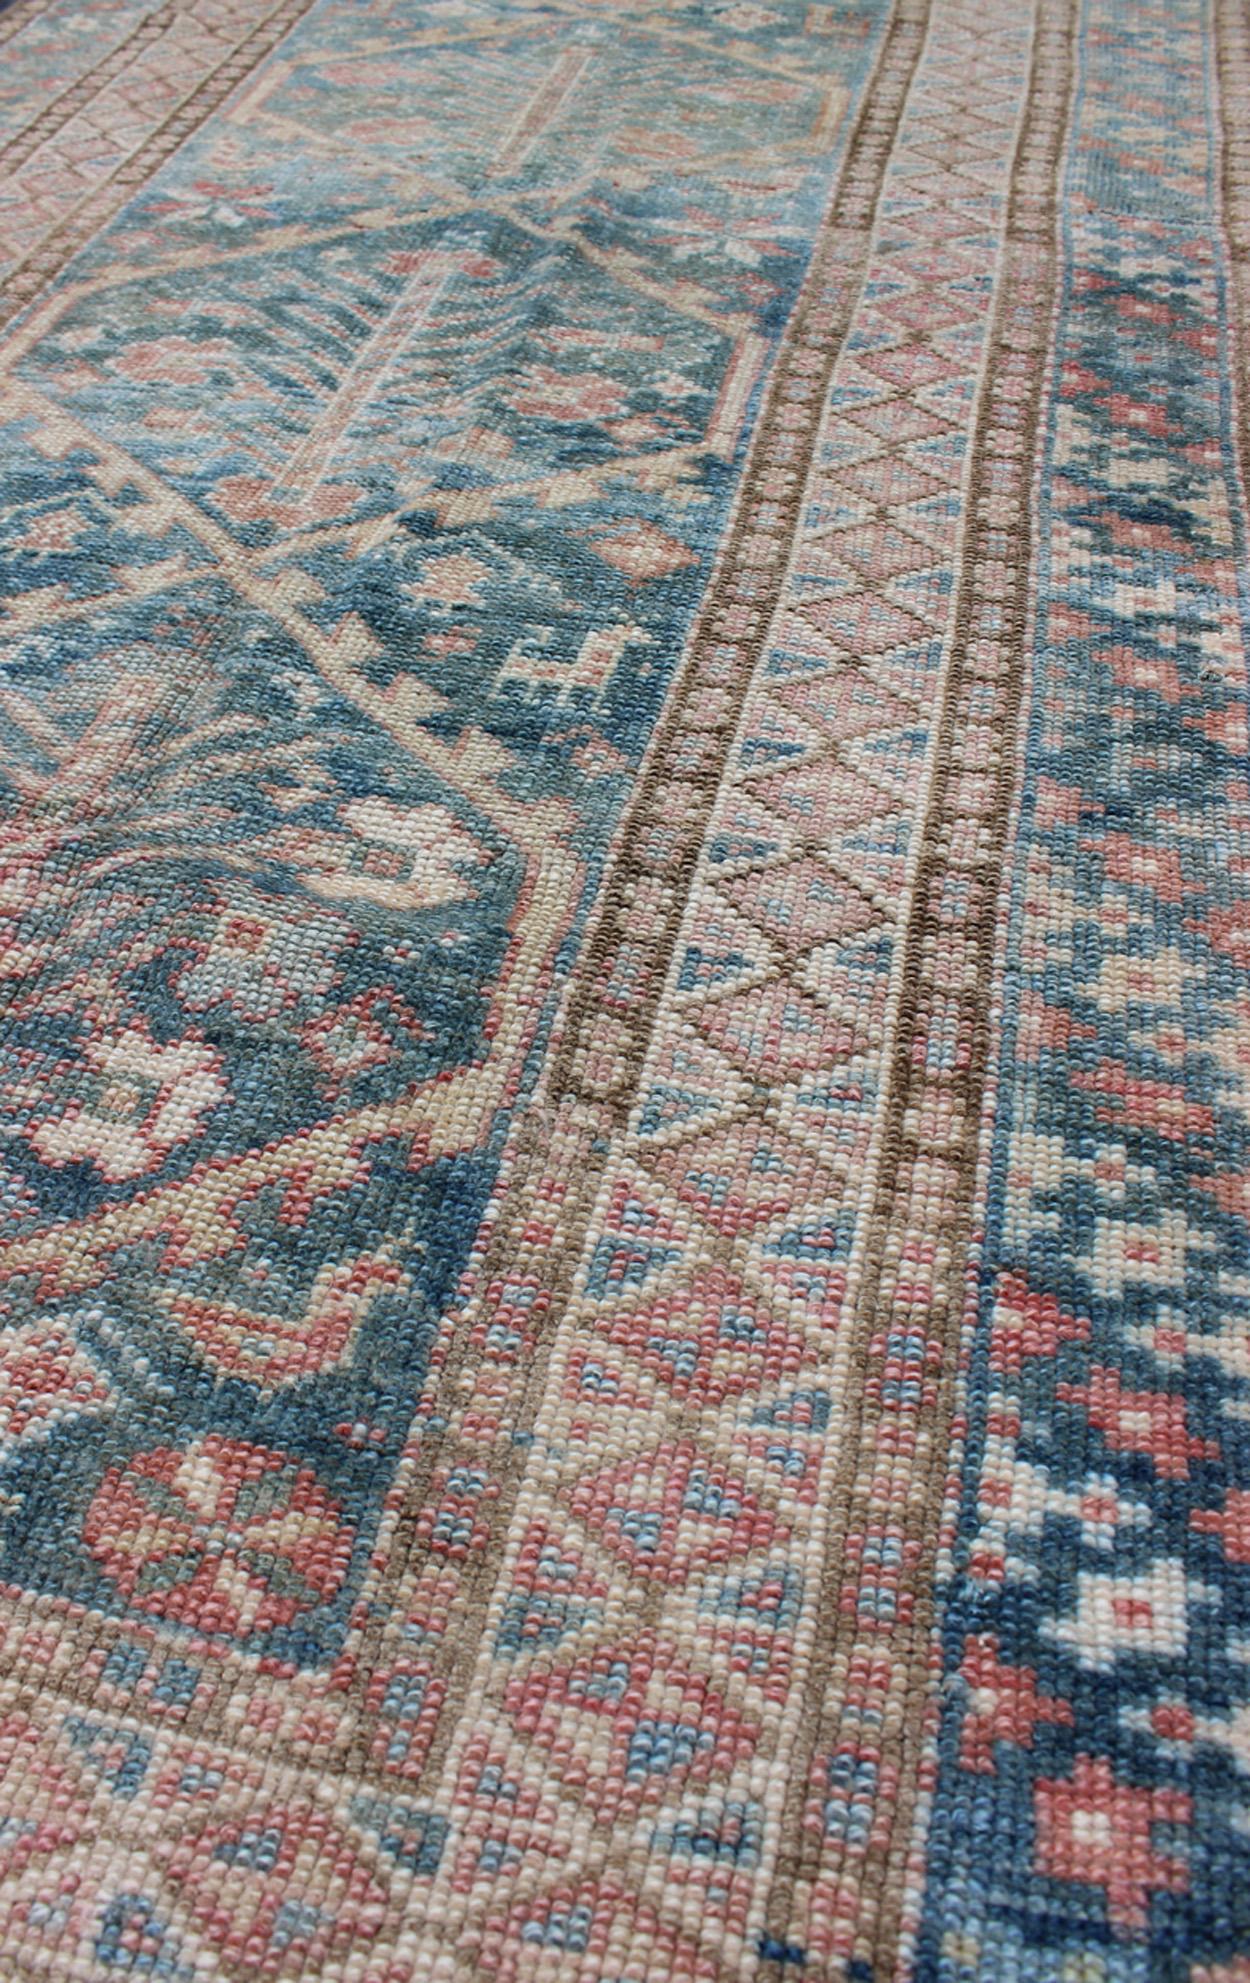 Antique Geometric Design Persian Small Lori Rug in Light Teal and Pink In Good Condition For Sale In Atlanta, GA